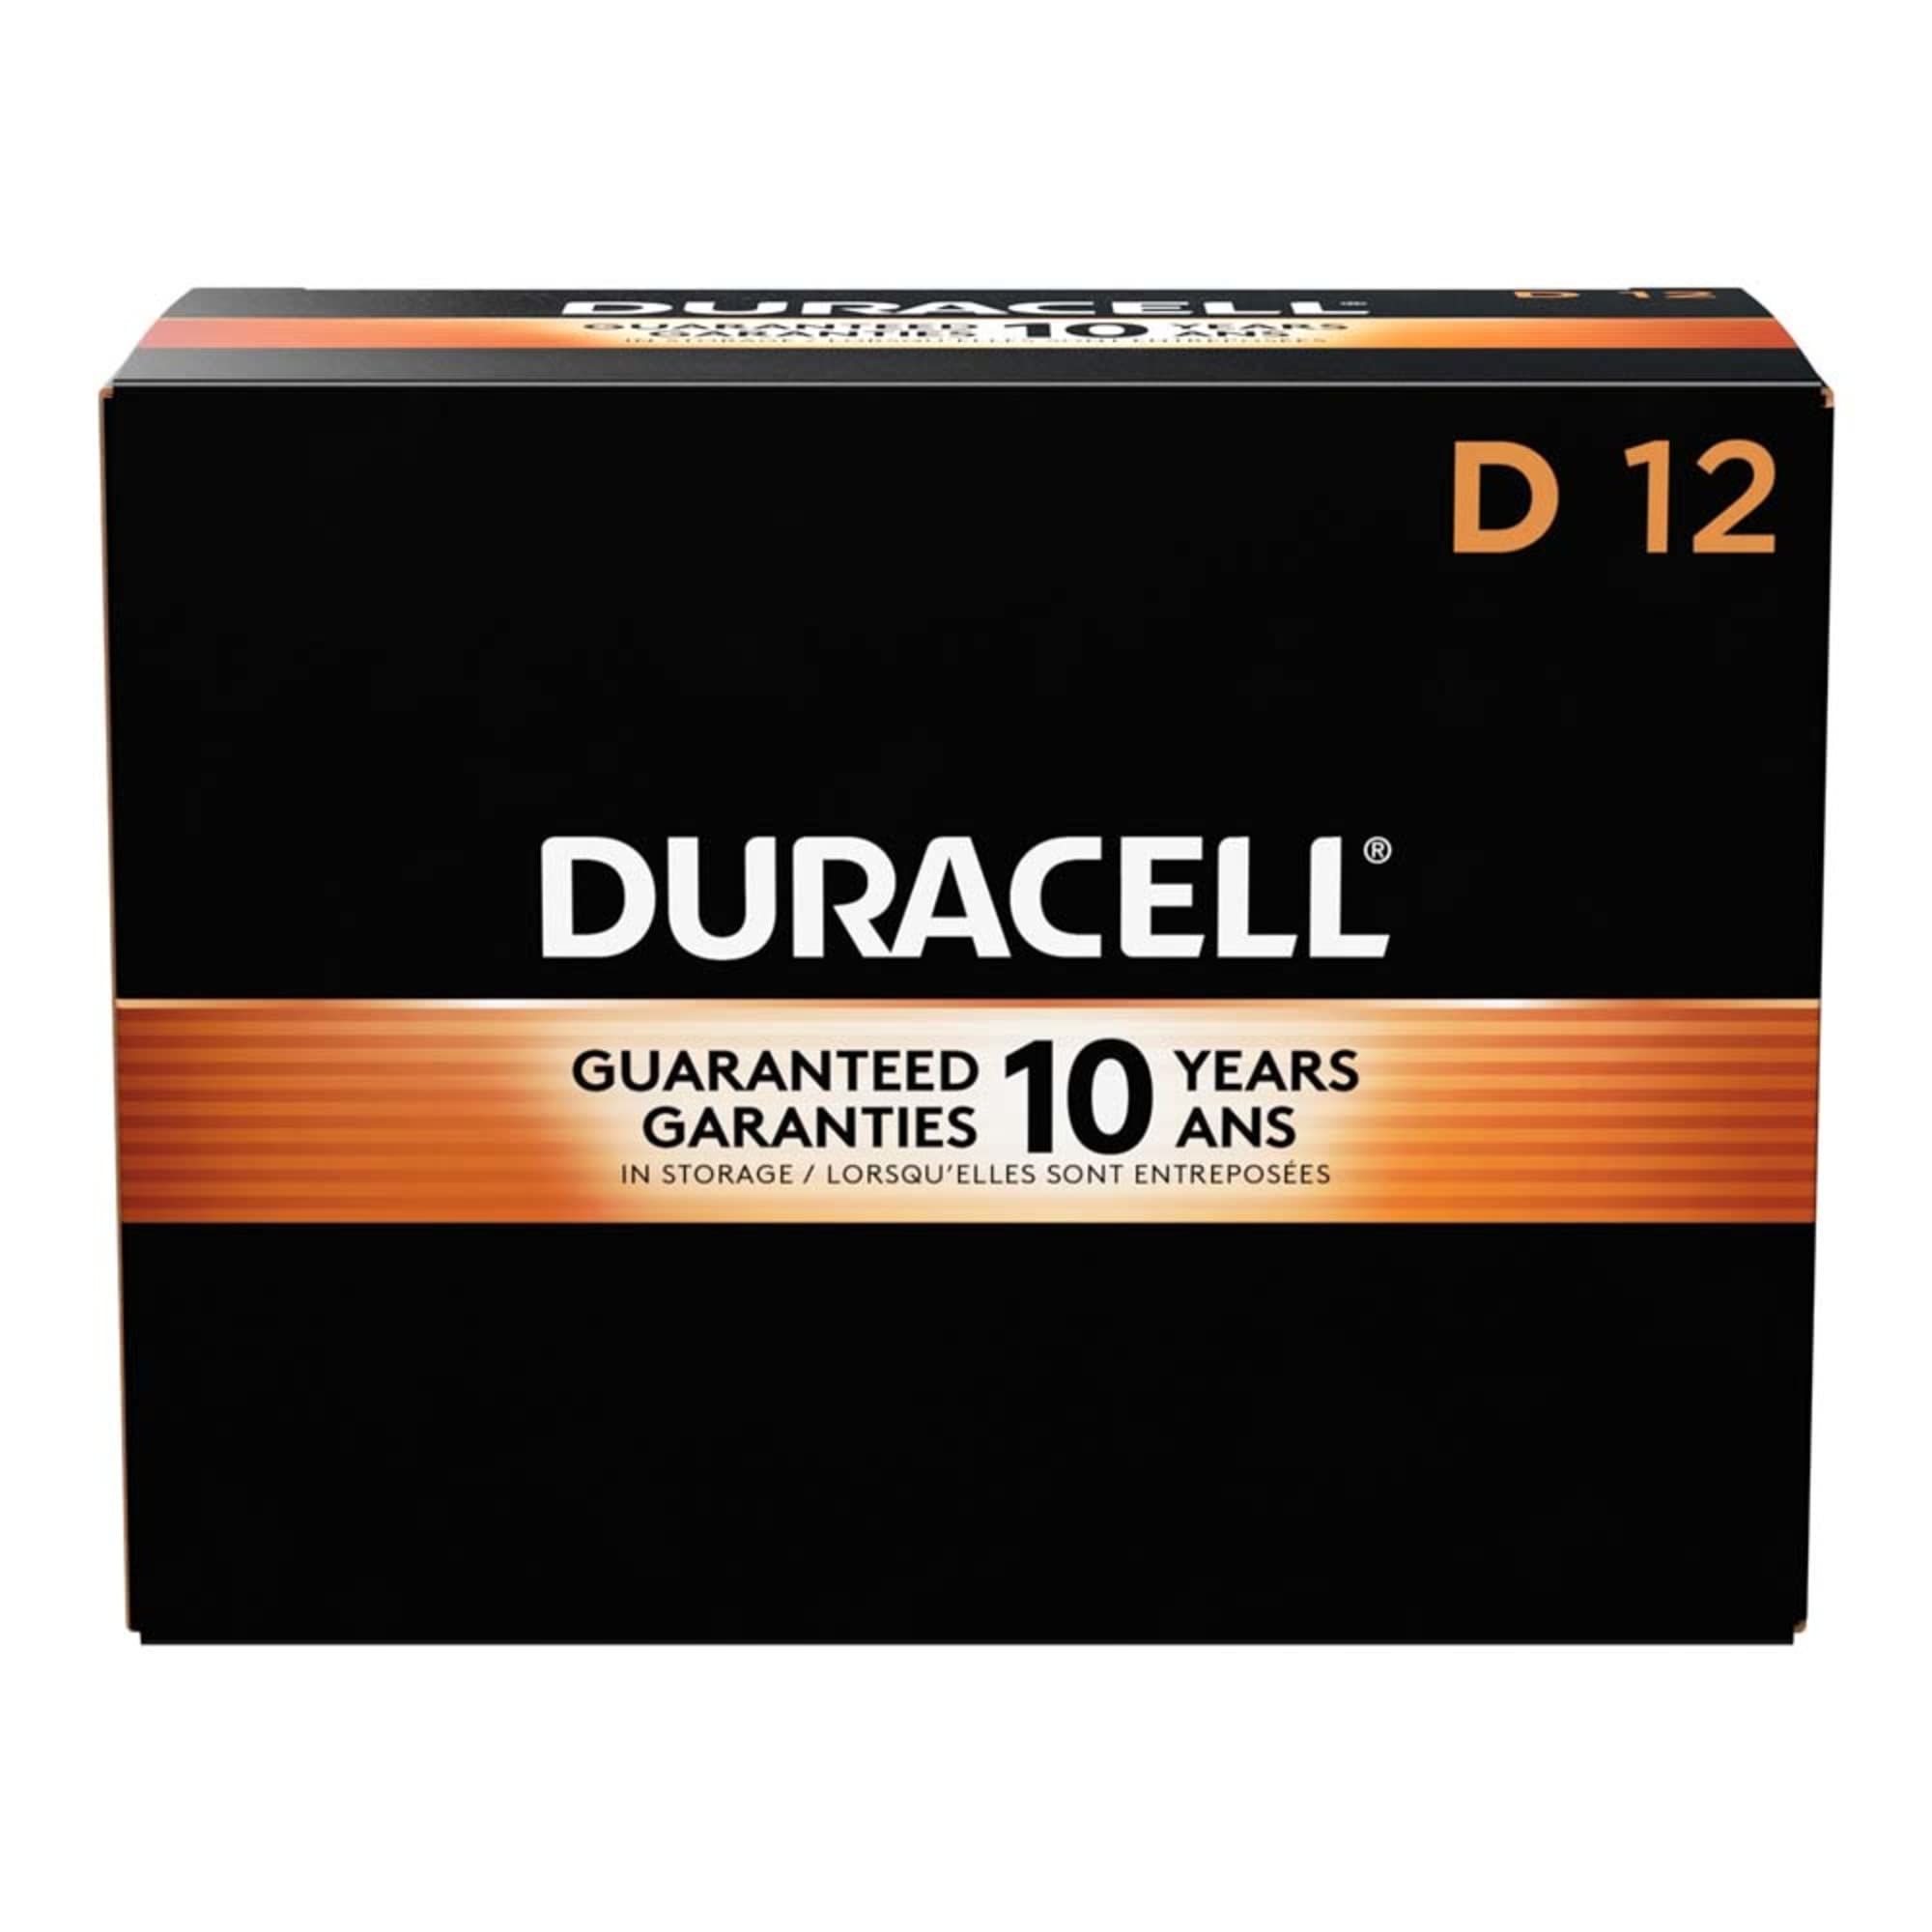 Duracell PGD MN1300 Coppertop Battery, Alkaline, D Size (Pack of 12)